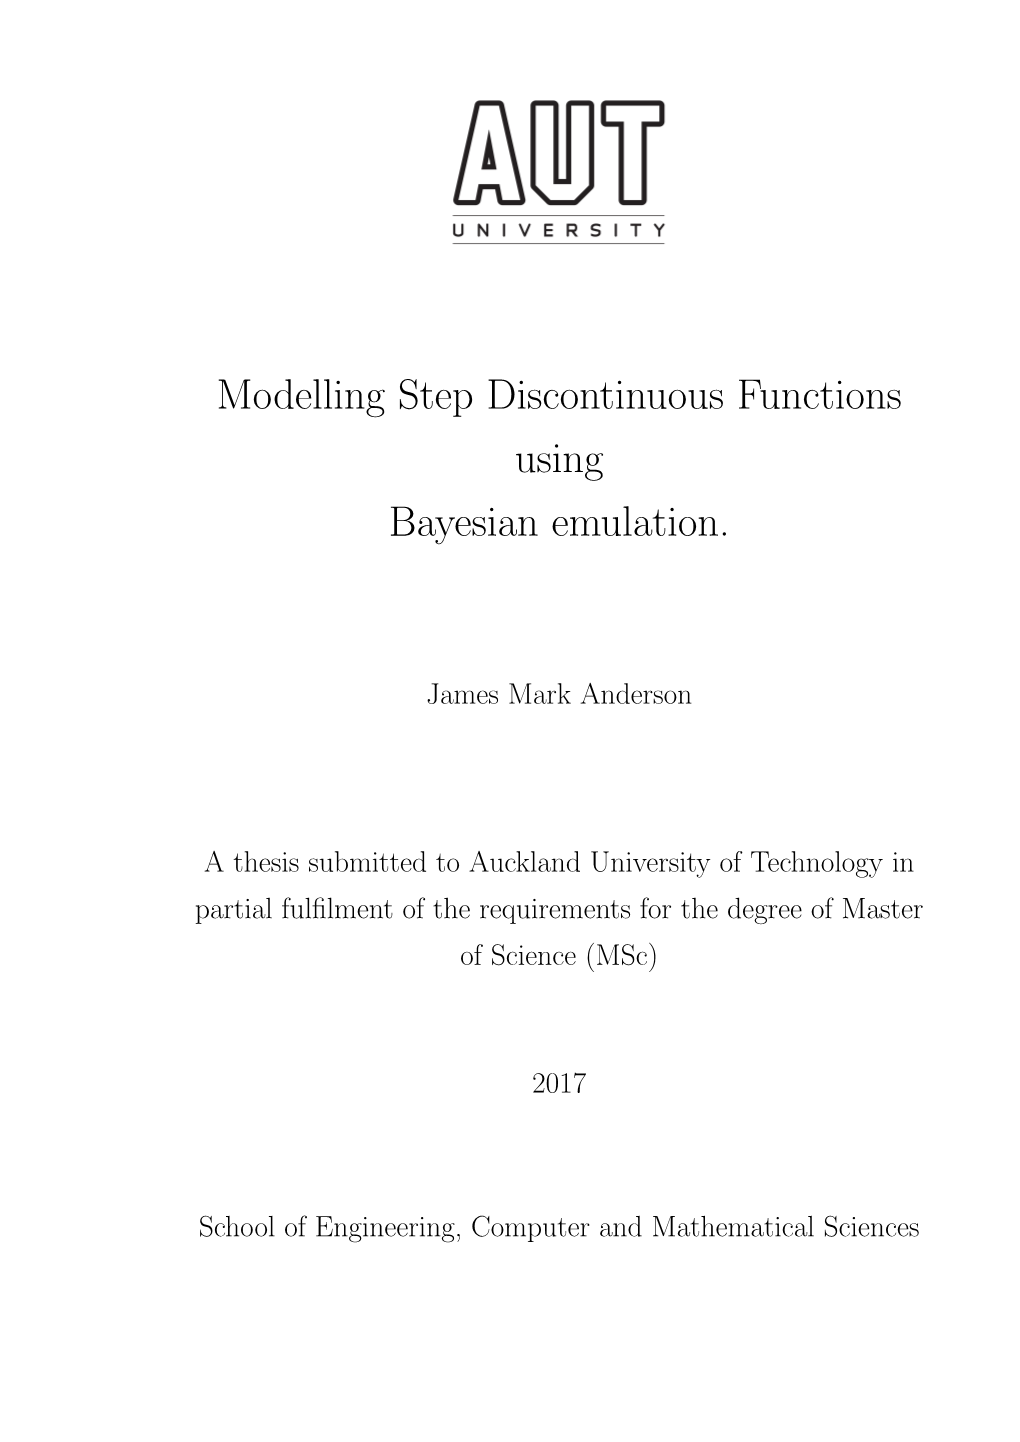 Modelling Step Discontinuous Functions Using Bayesian Emulation